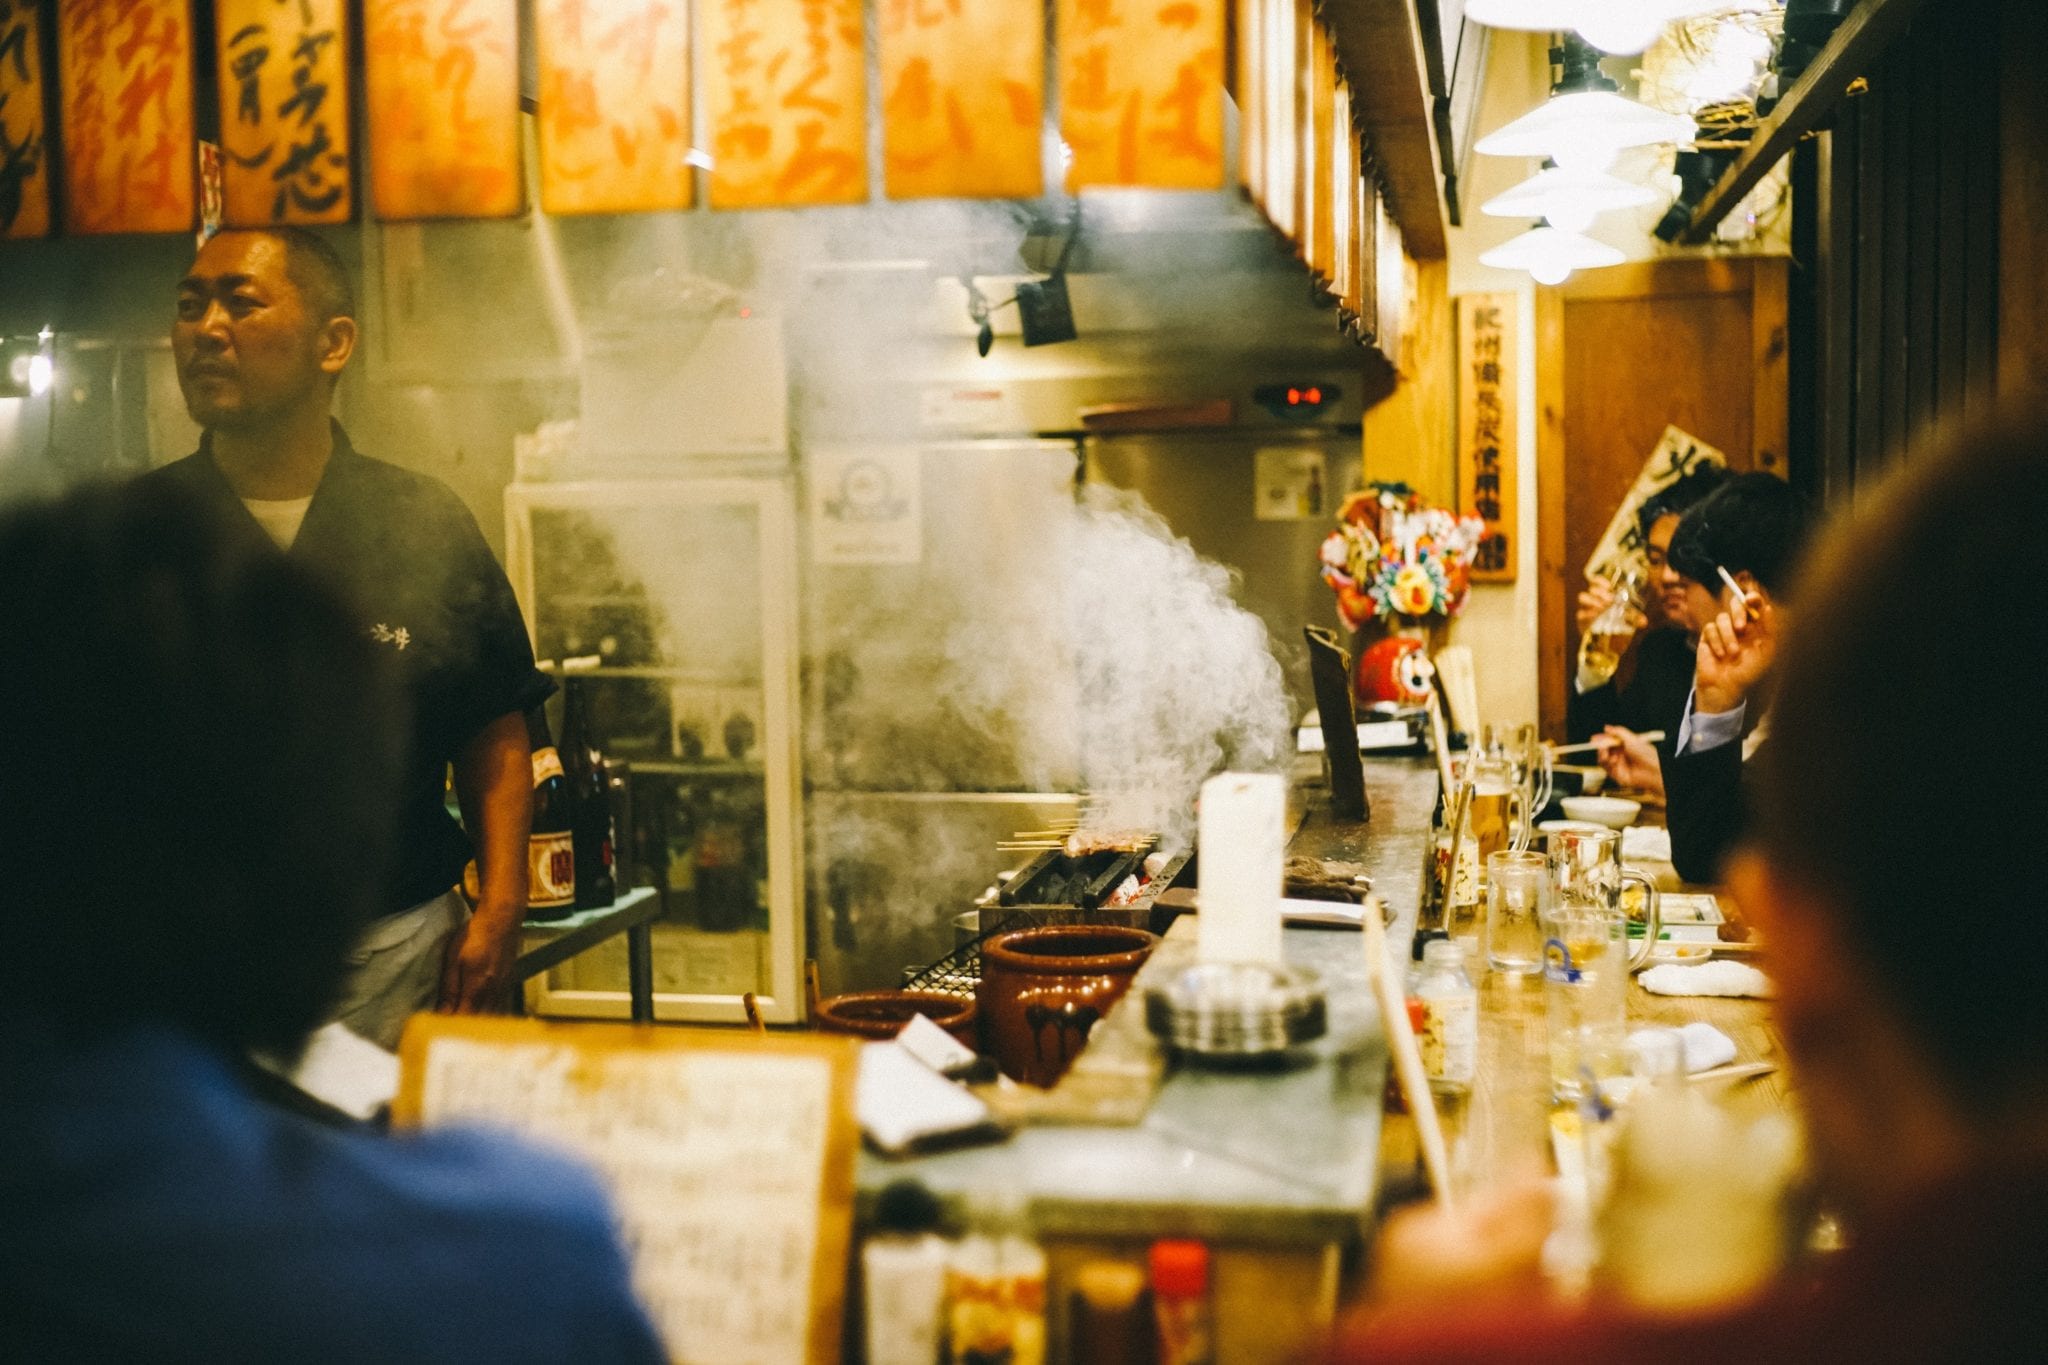 Steam coming off the grill in a Japanese izakaya